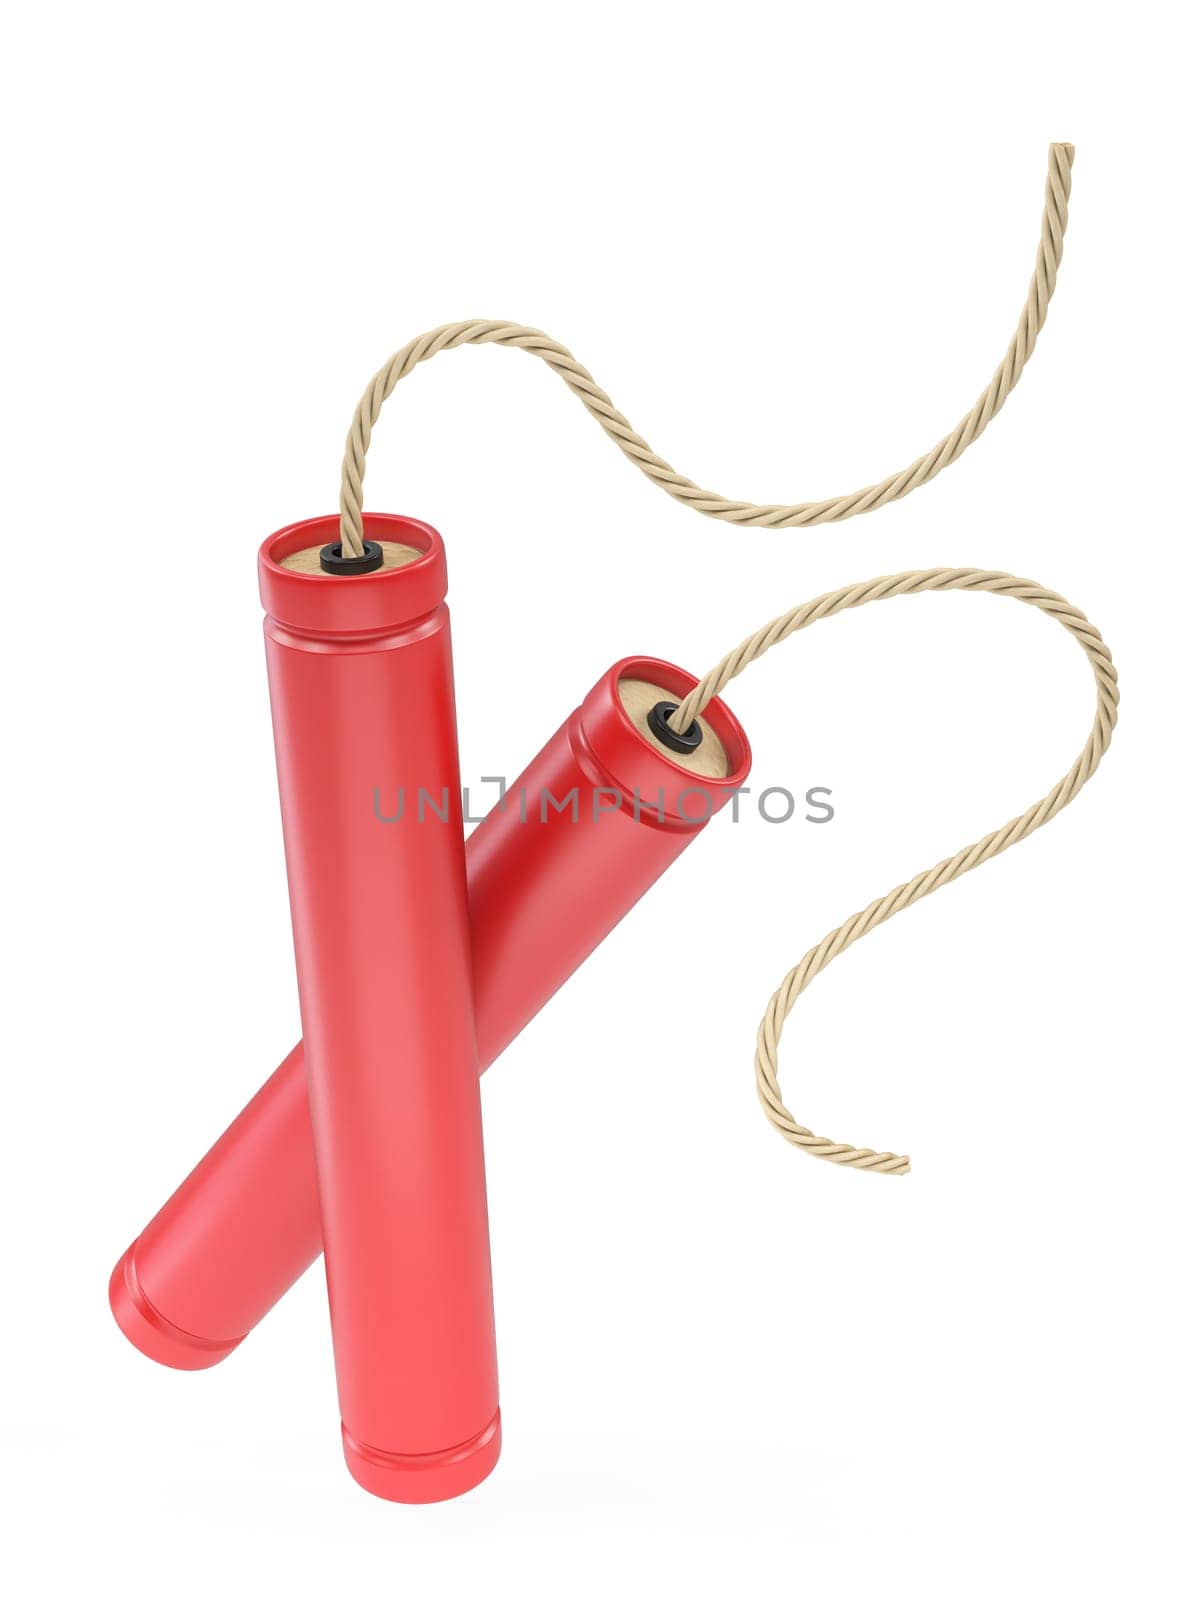 Two dynamite TNT sticks 3D rendering illustration isolated on white background